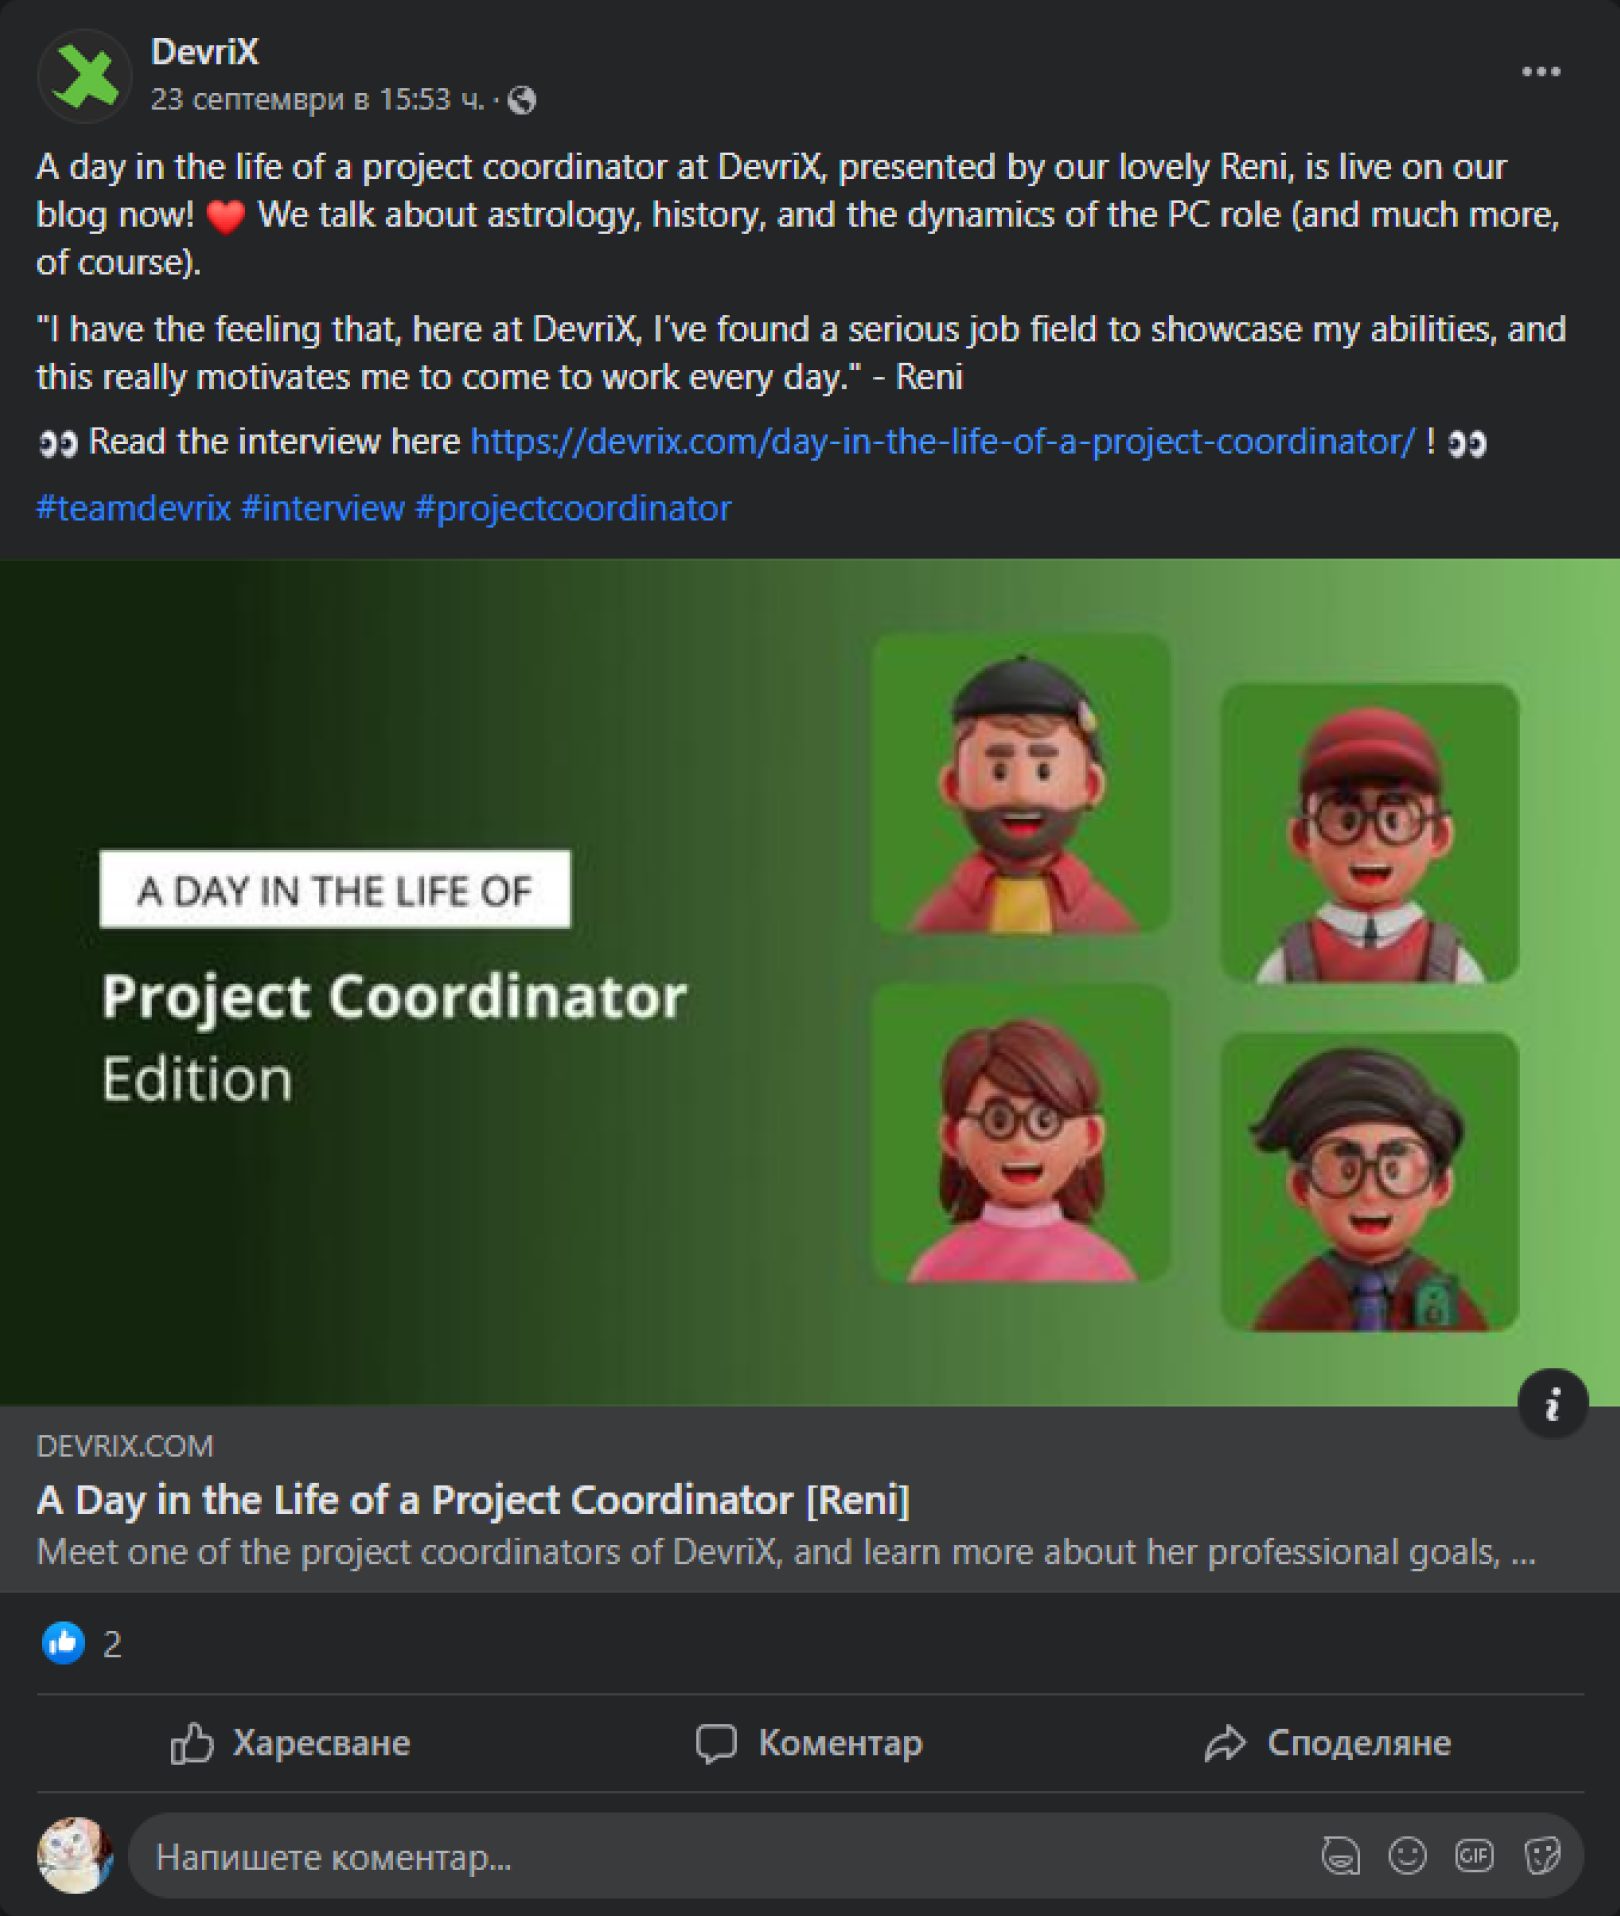 Screenshot of a Facebook post by DevriX promoting 'A Day in the Life of a Project Coordinator' blog article. The post includes a quote from Reni, a project coordinator, expressing motivation in her role at DevriX, and an invitation to read the full interview with a link provided. The image also showcases a preview of the blog post with caricatures of Reni in different professional settings, highlighting the personal touch and detailed insights the interview will offer.